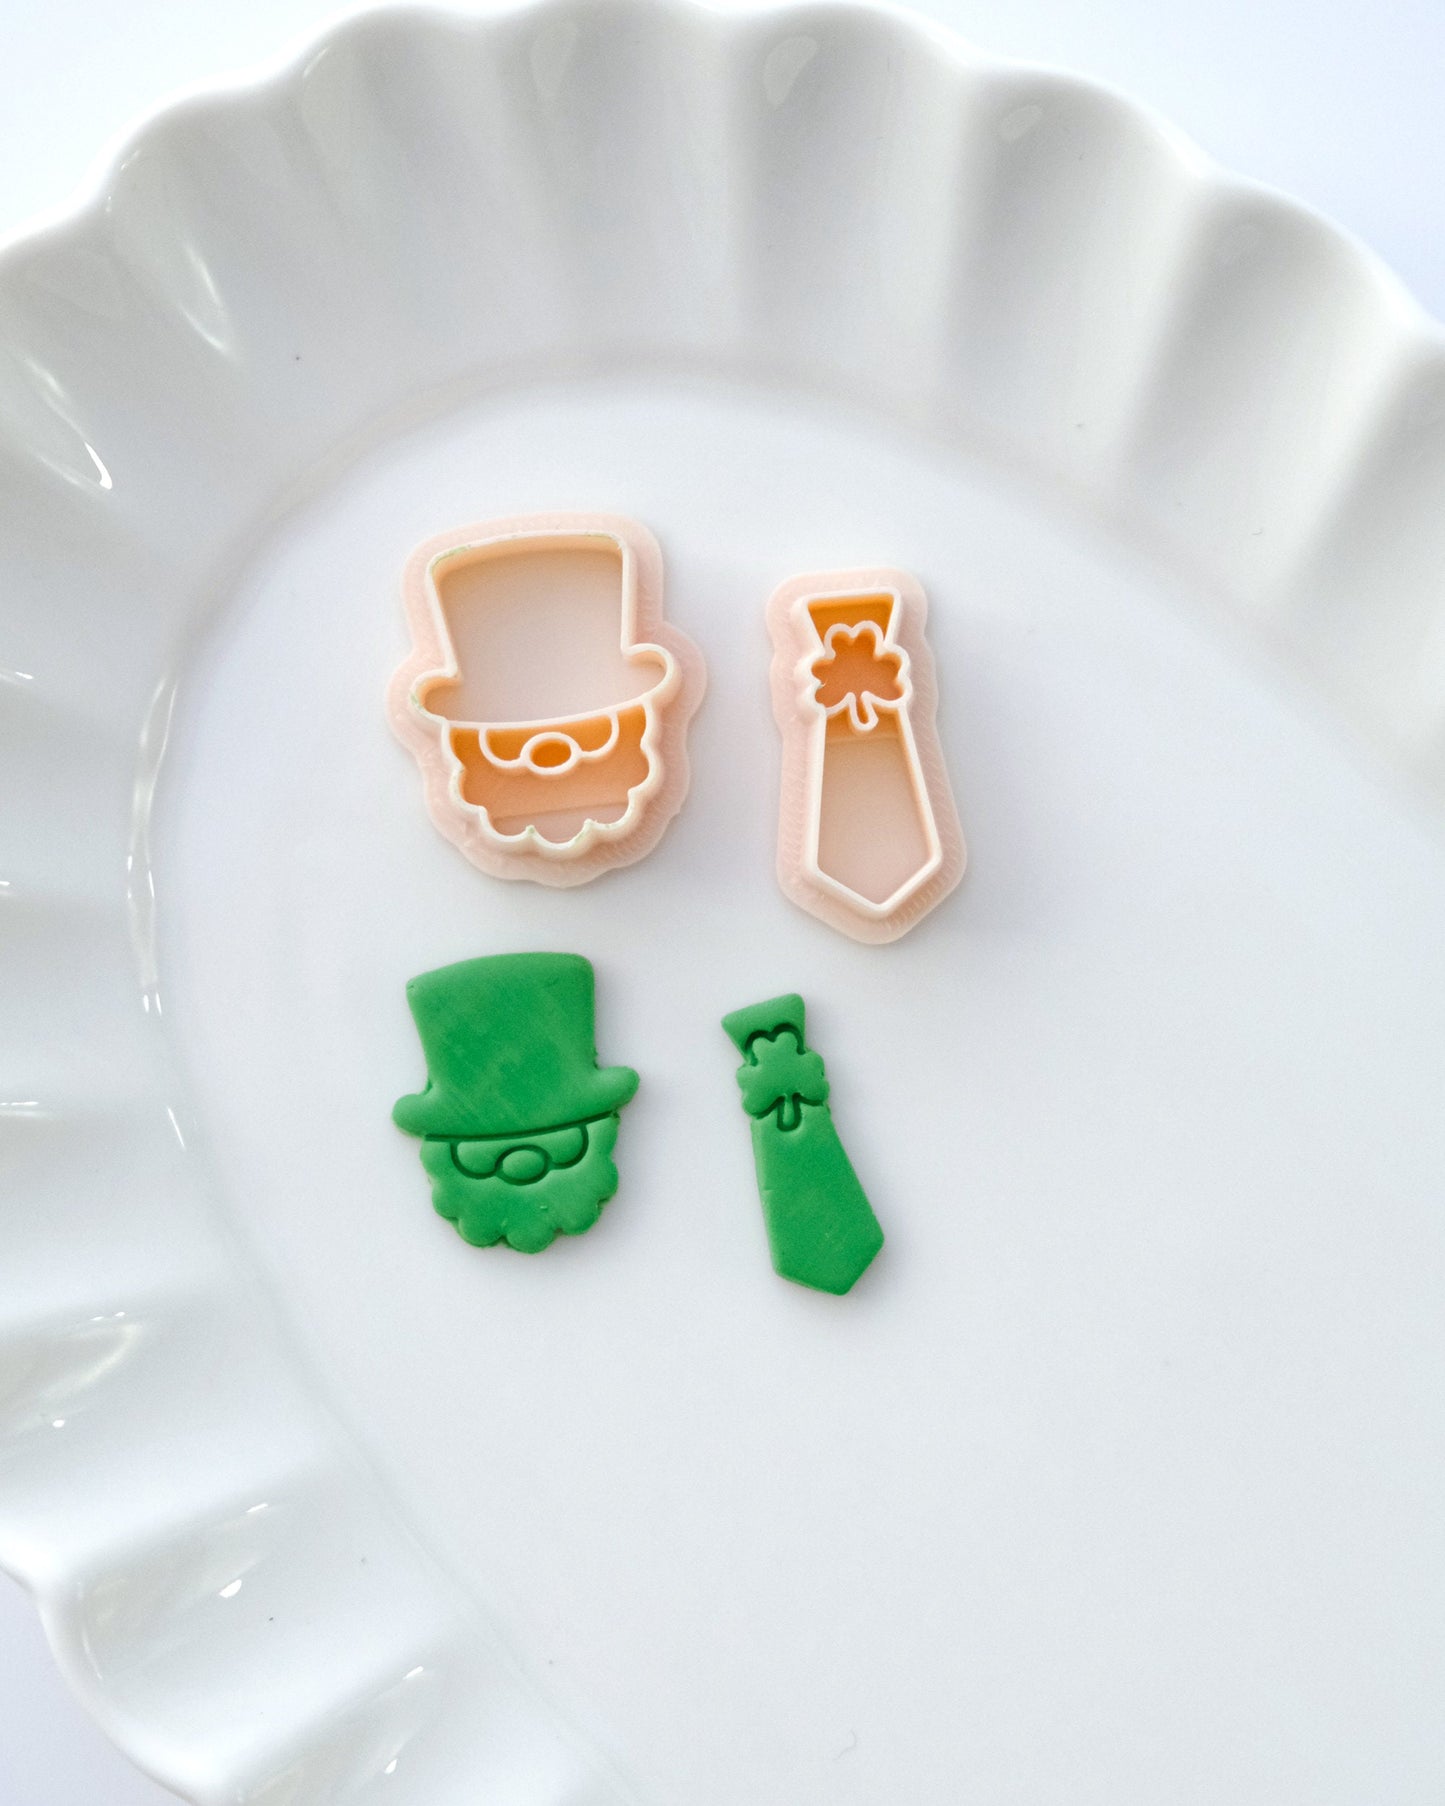 St Patricks Day Gnome Polymer Clay Cutters